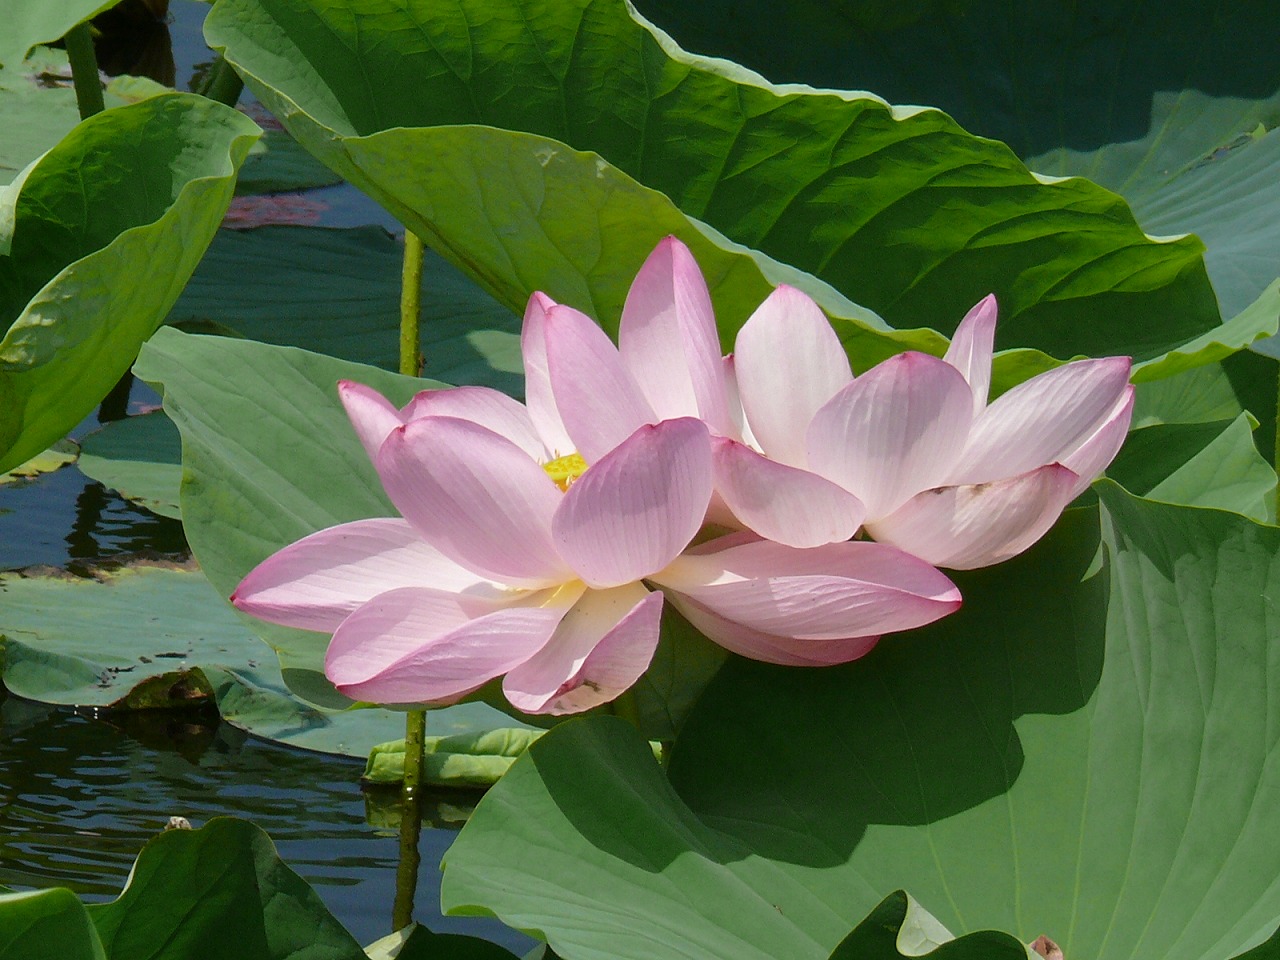 Gaze at the Stunning Collection of Lotus Blossoms on a Guided Tour